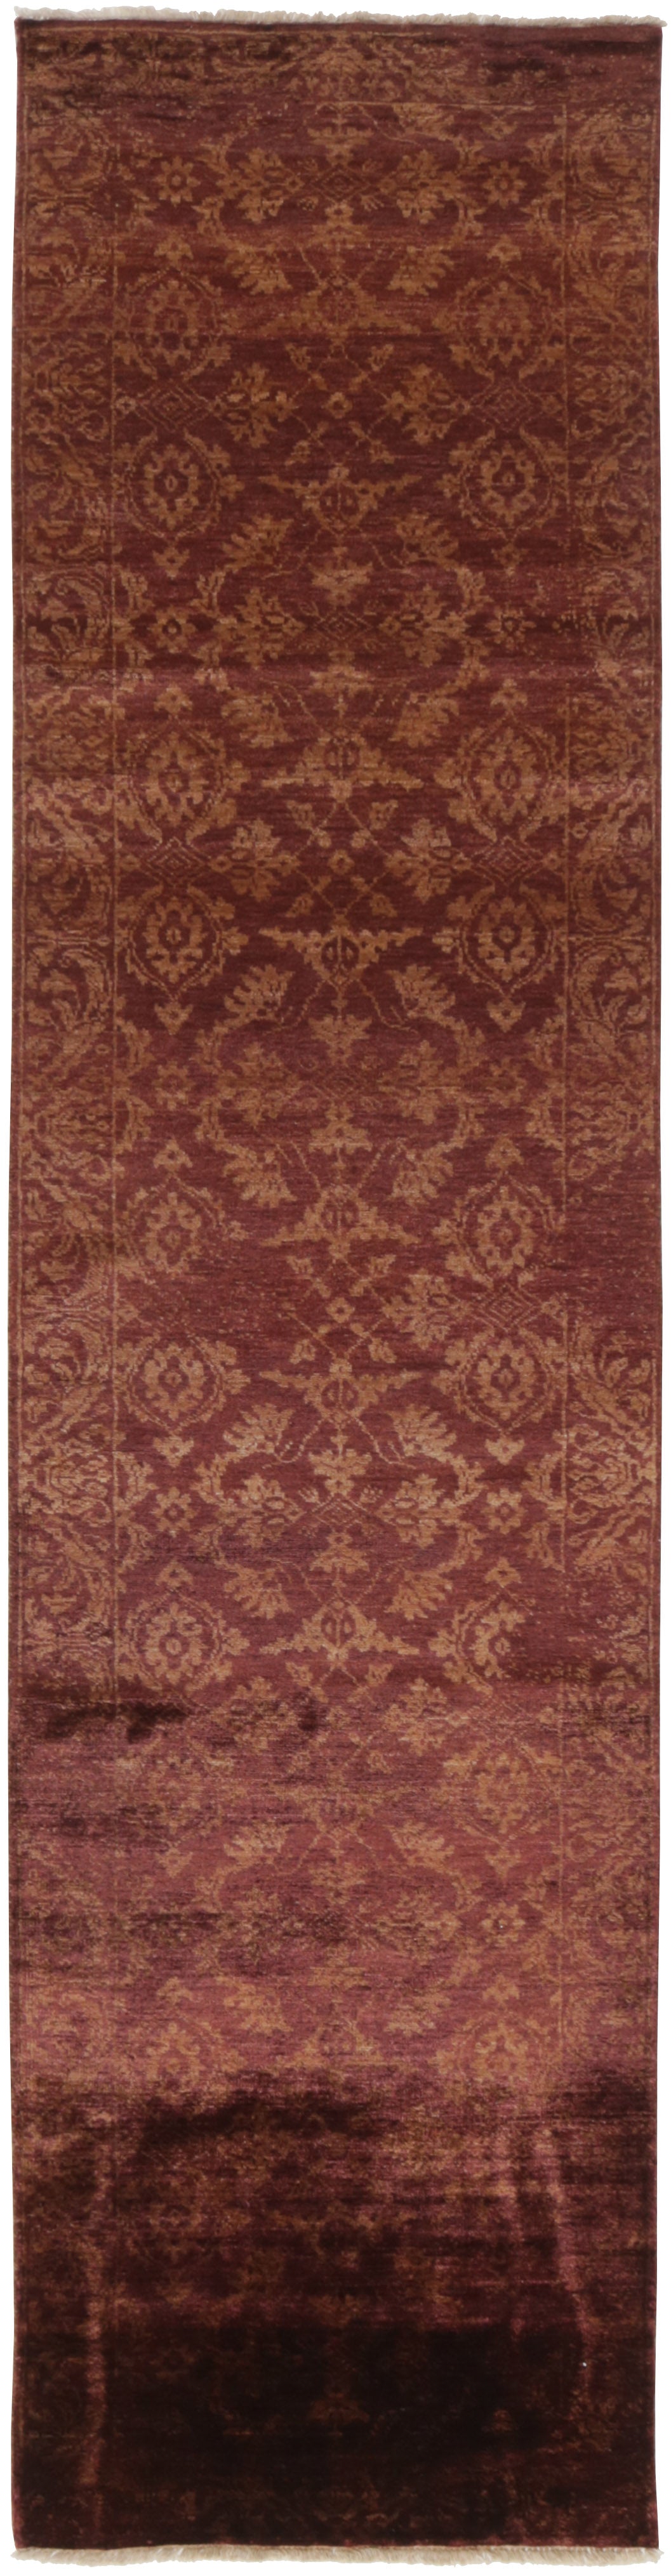 Authentic Oriental rug with traditional geometric and floral design in red, grey, black and beige.